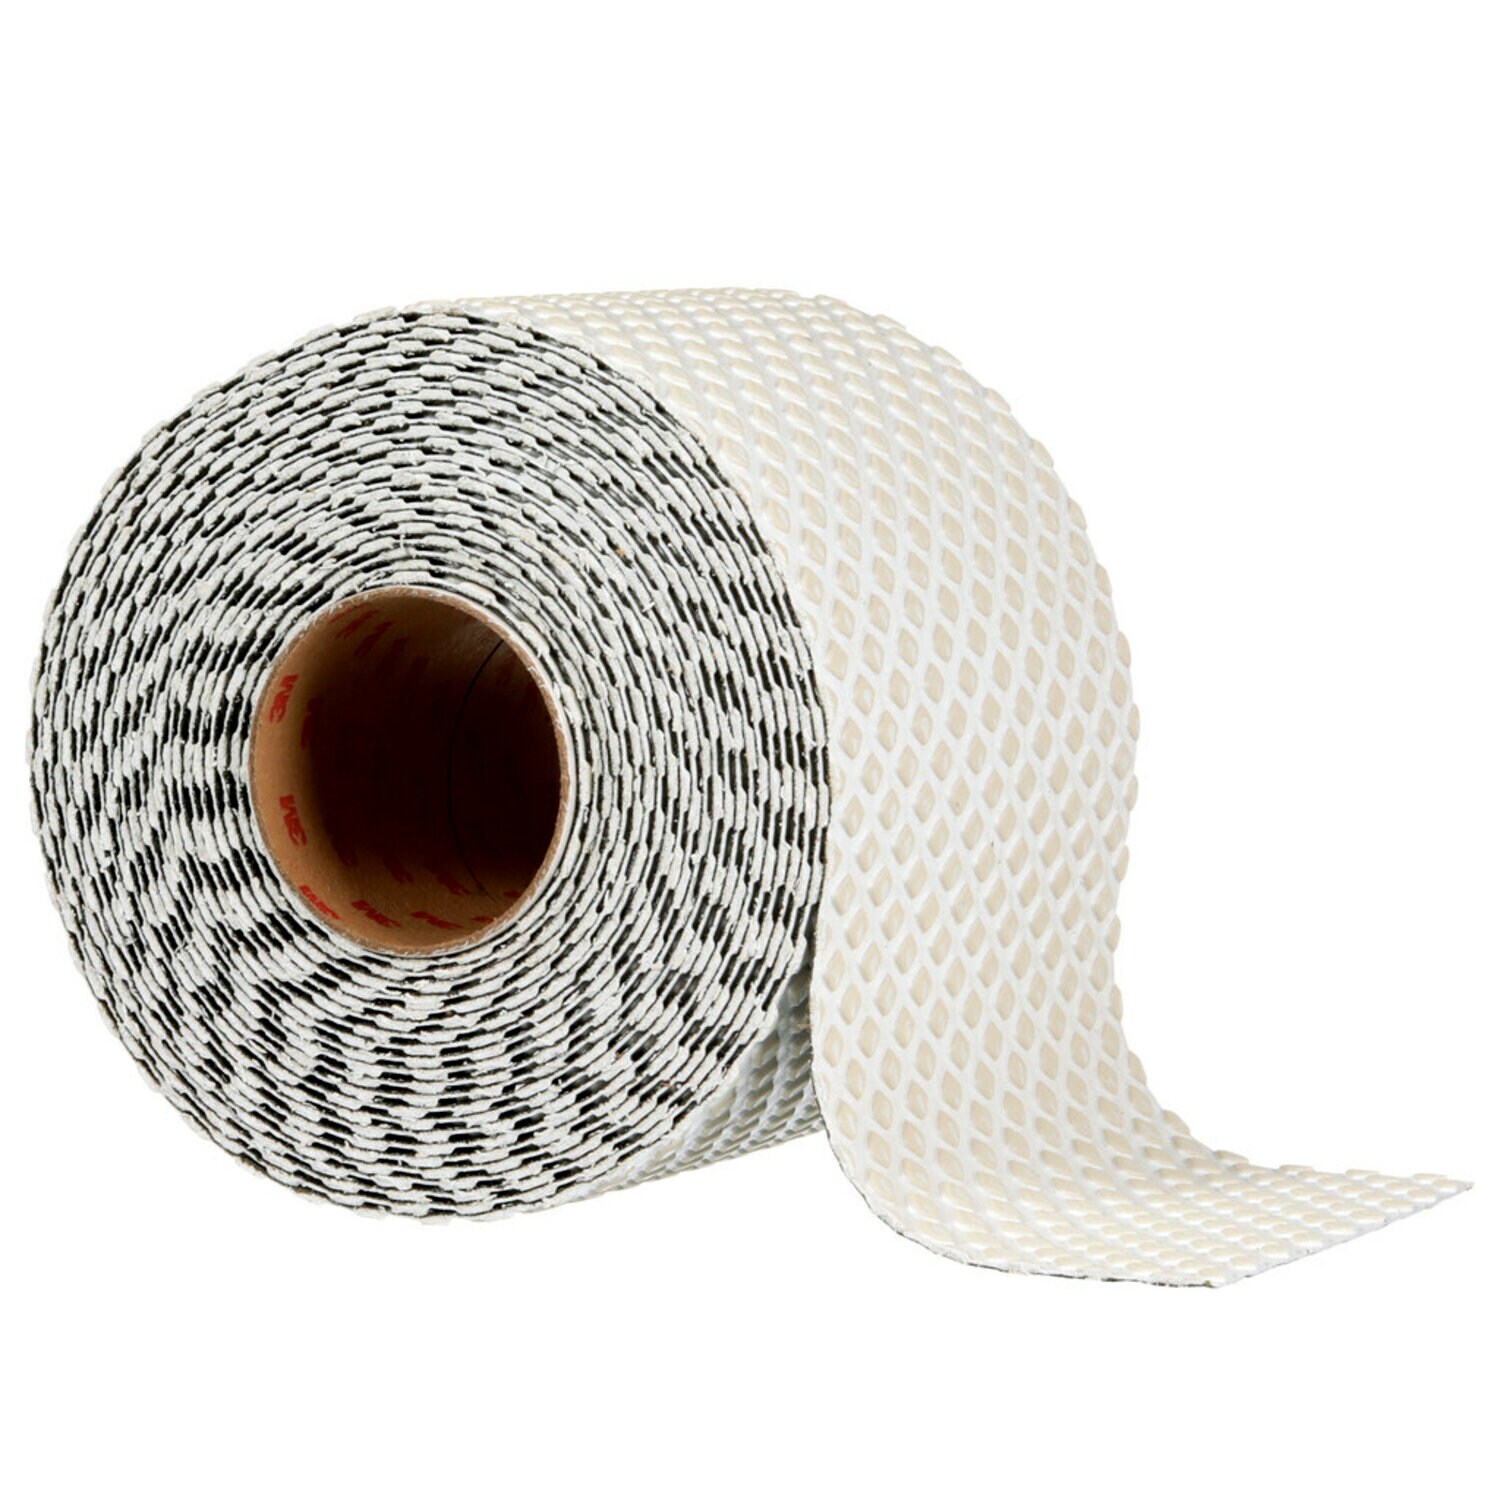 7000030879 - 3M Stamark High Performance All Weather Net Tape A380AW, White, 6 in x
70 yd, 1/Carton